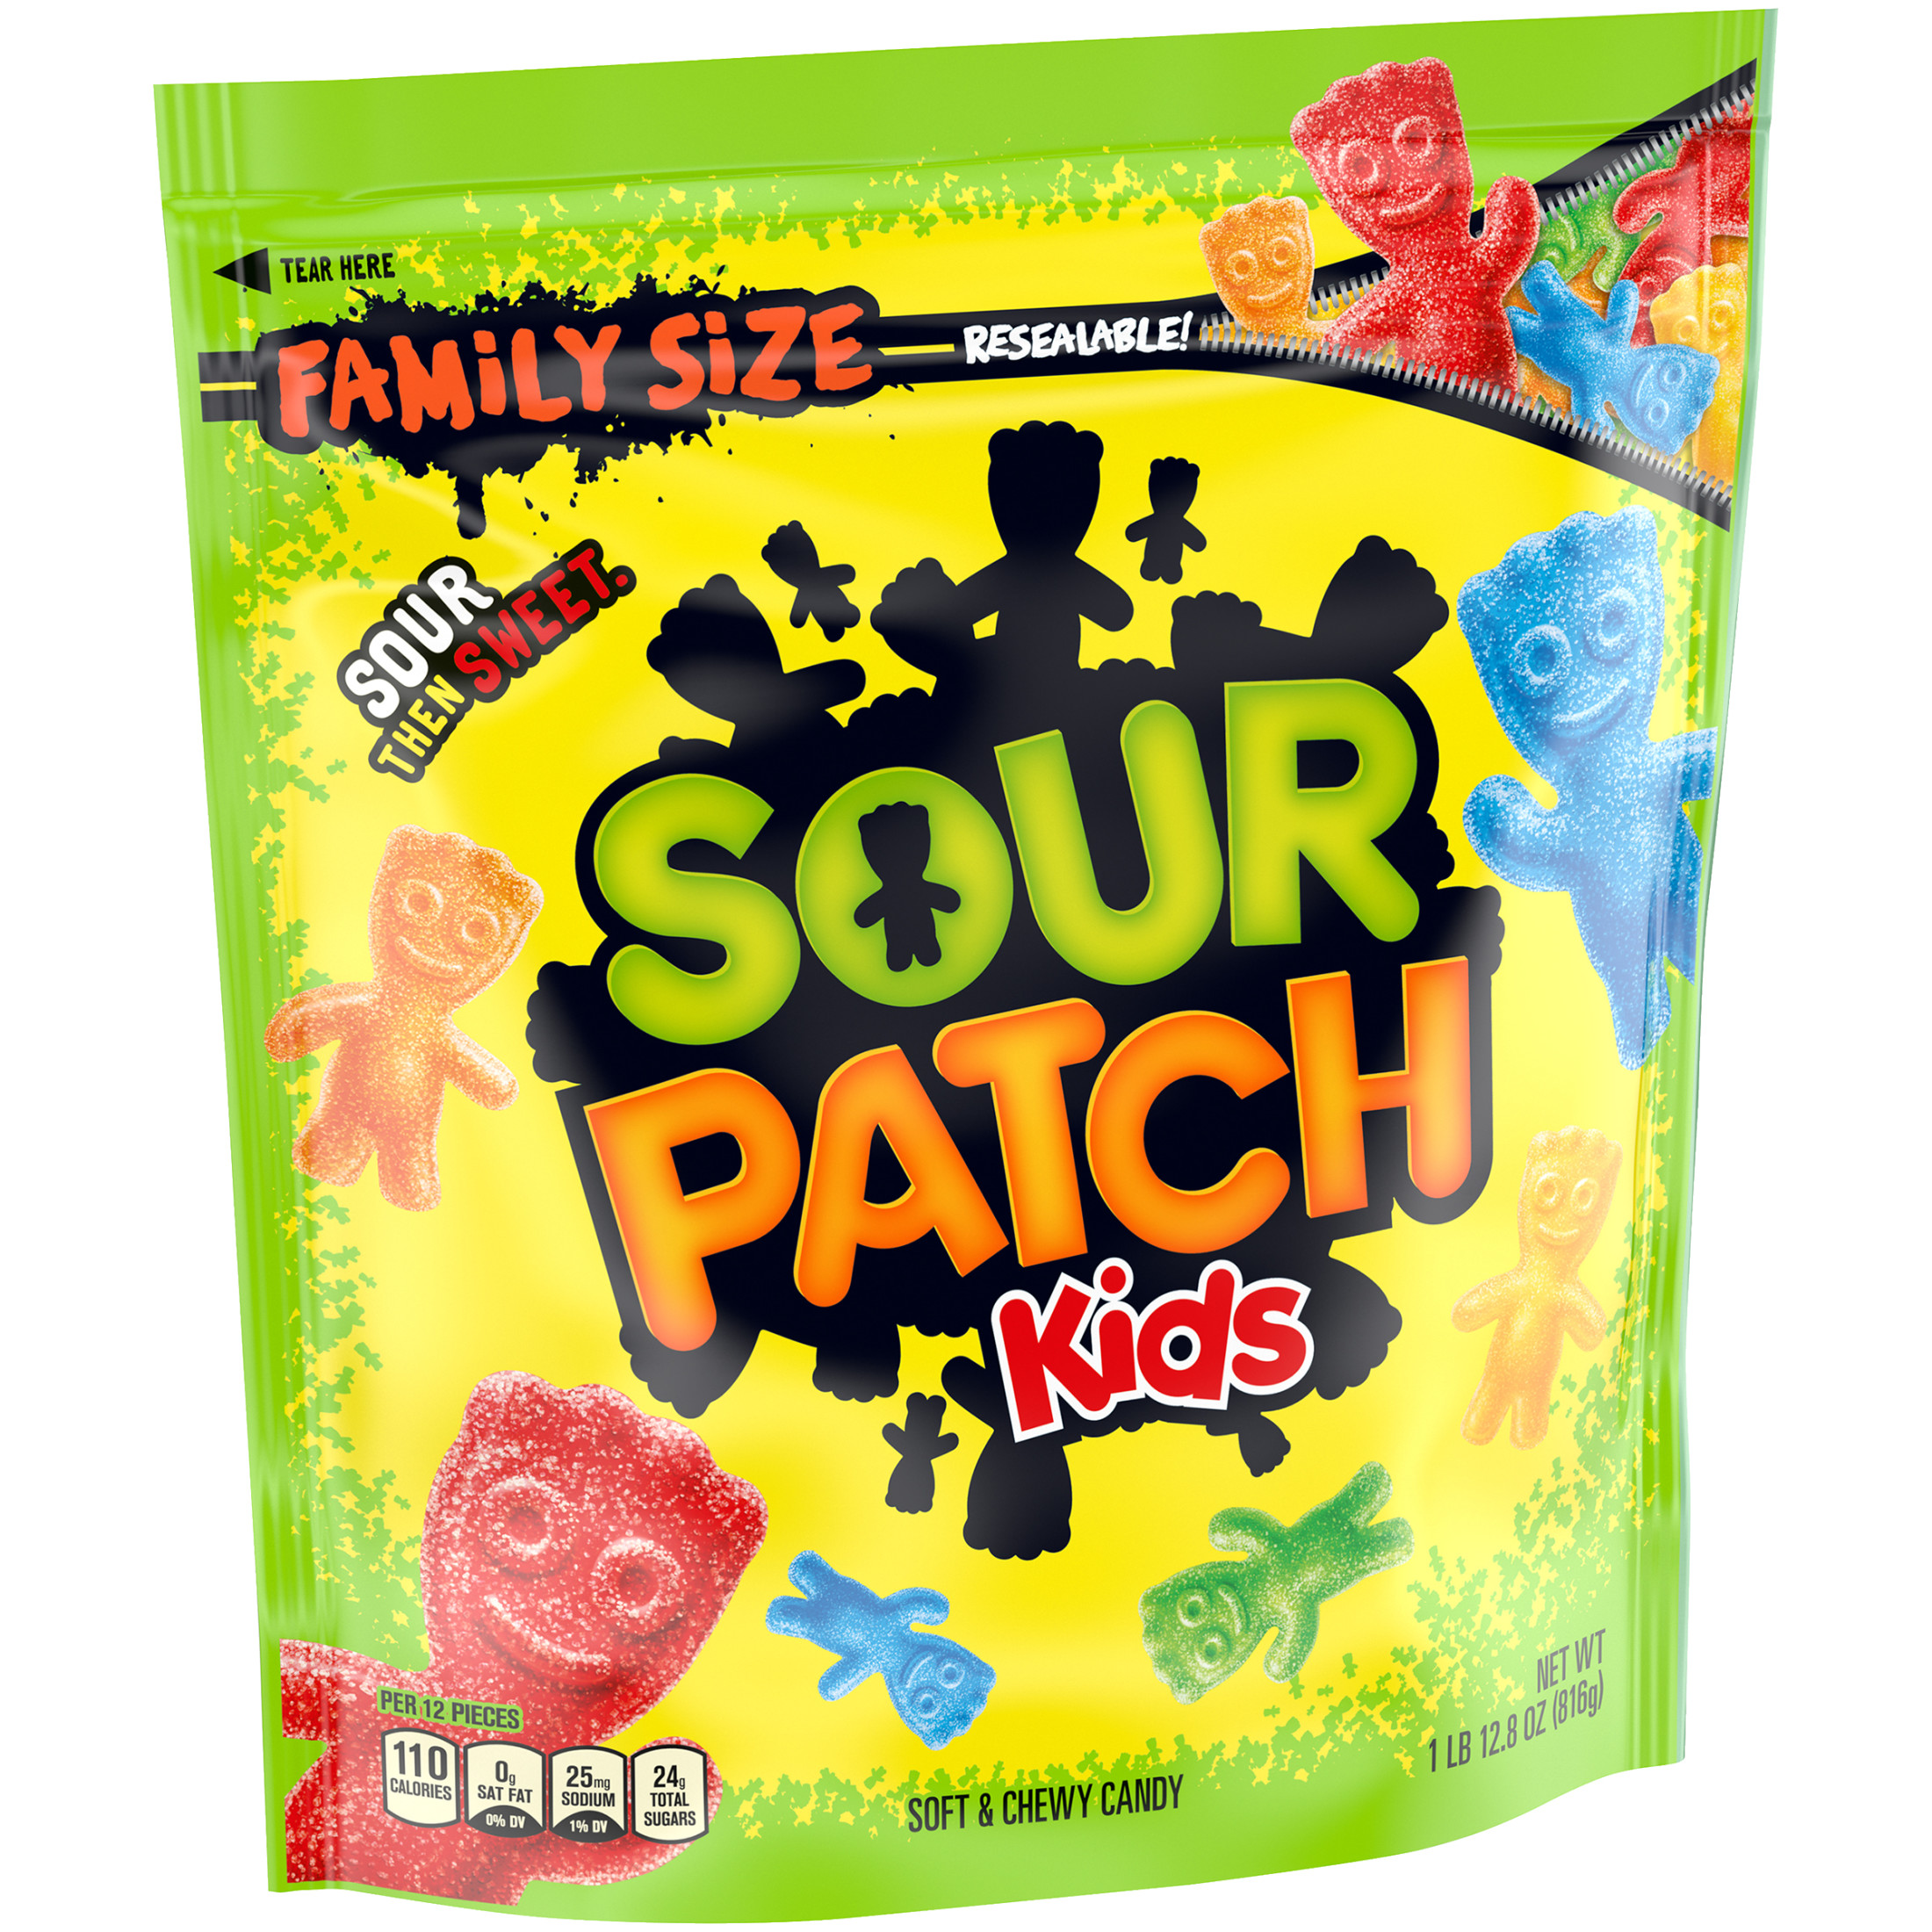 SOUR PATCH KIDS Soft & Chewy Candy, Family Size, 1.8 lb Bag - image 2 of 12